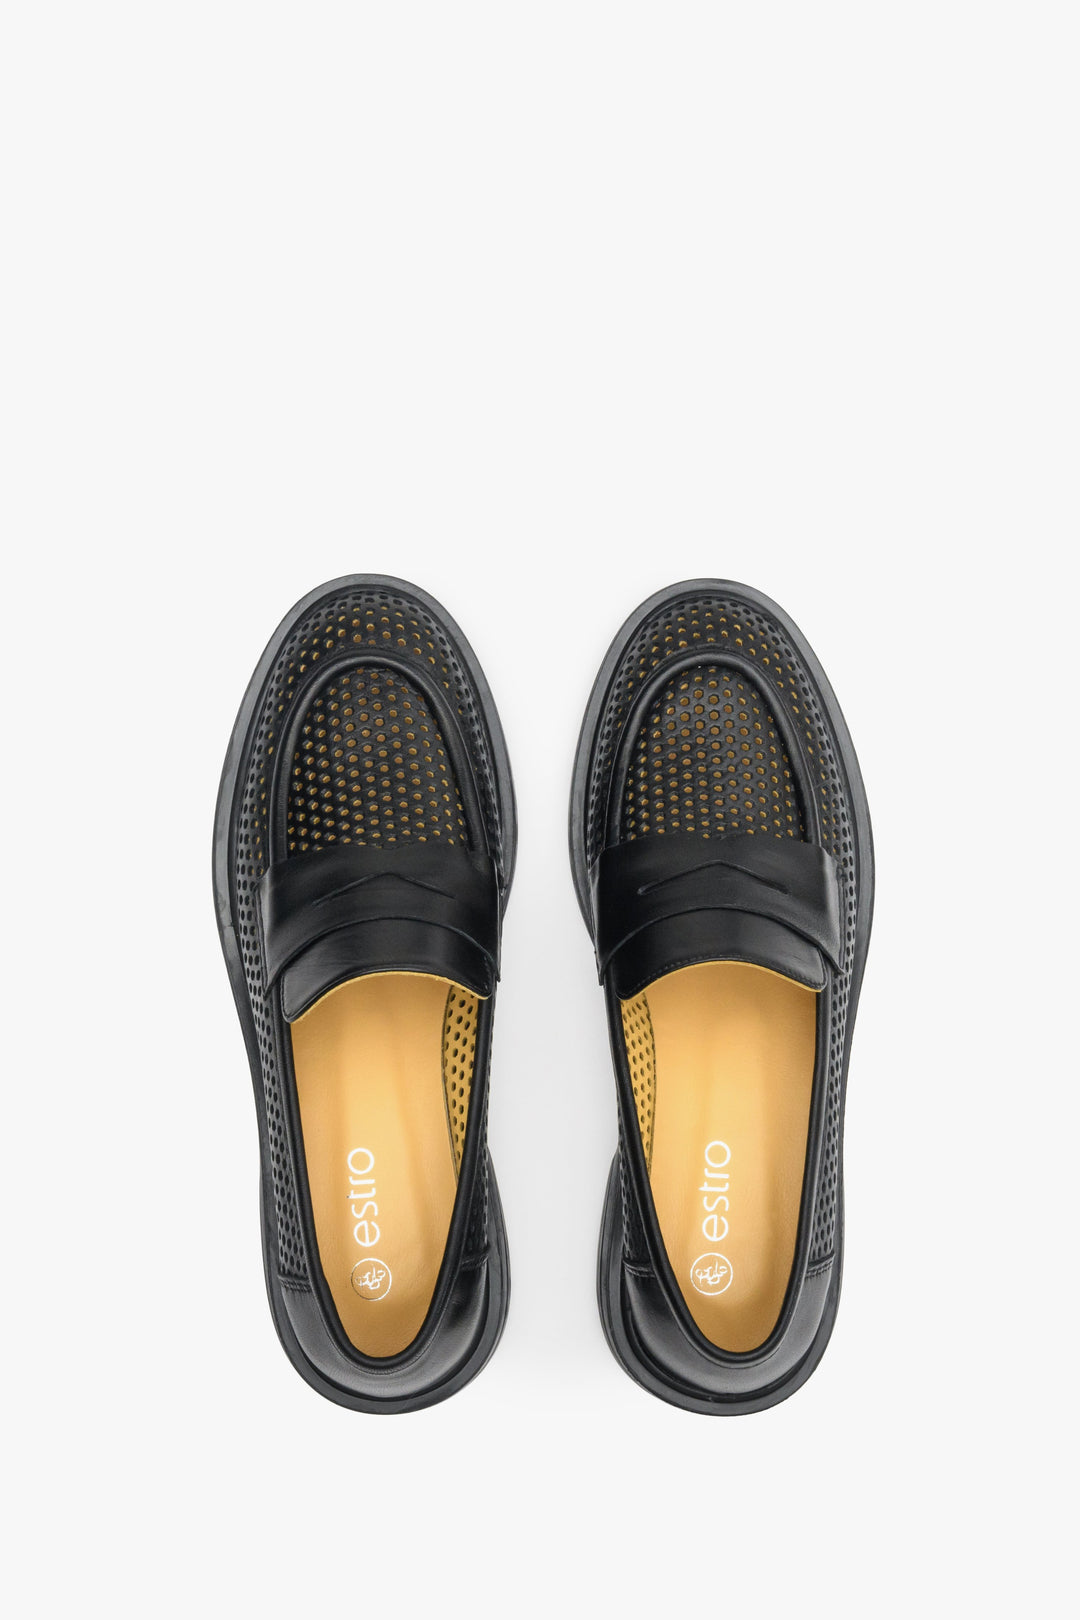 Comfortable women's black Estro fall loafers - top view of the footwear.